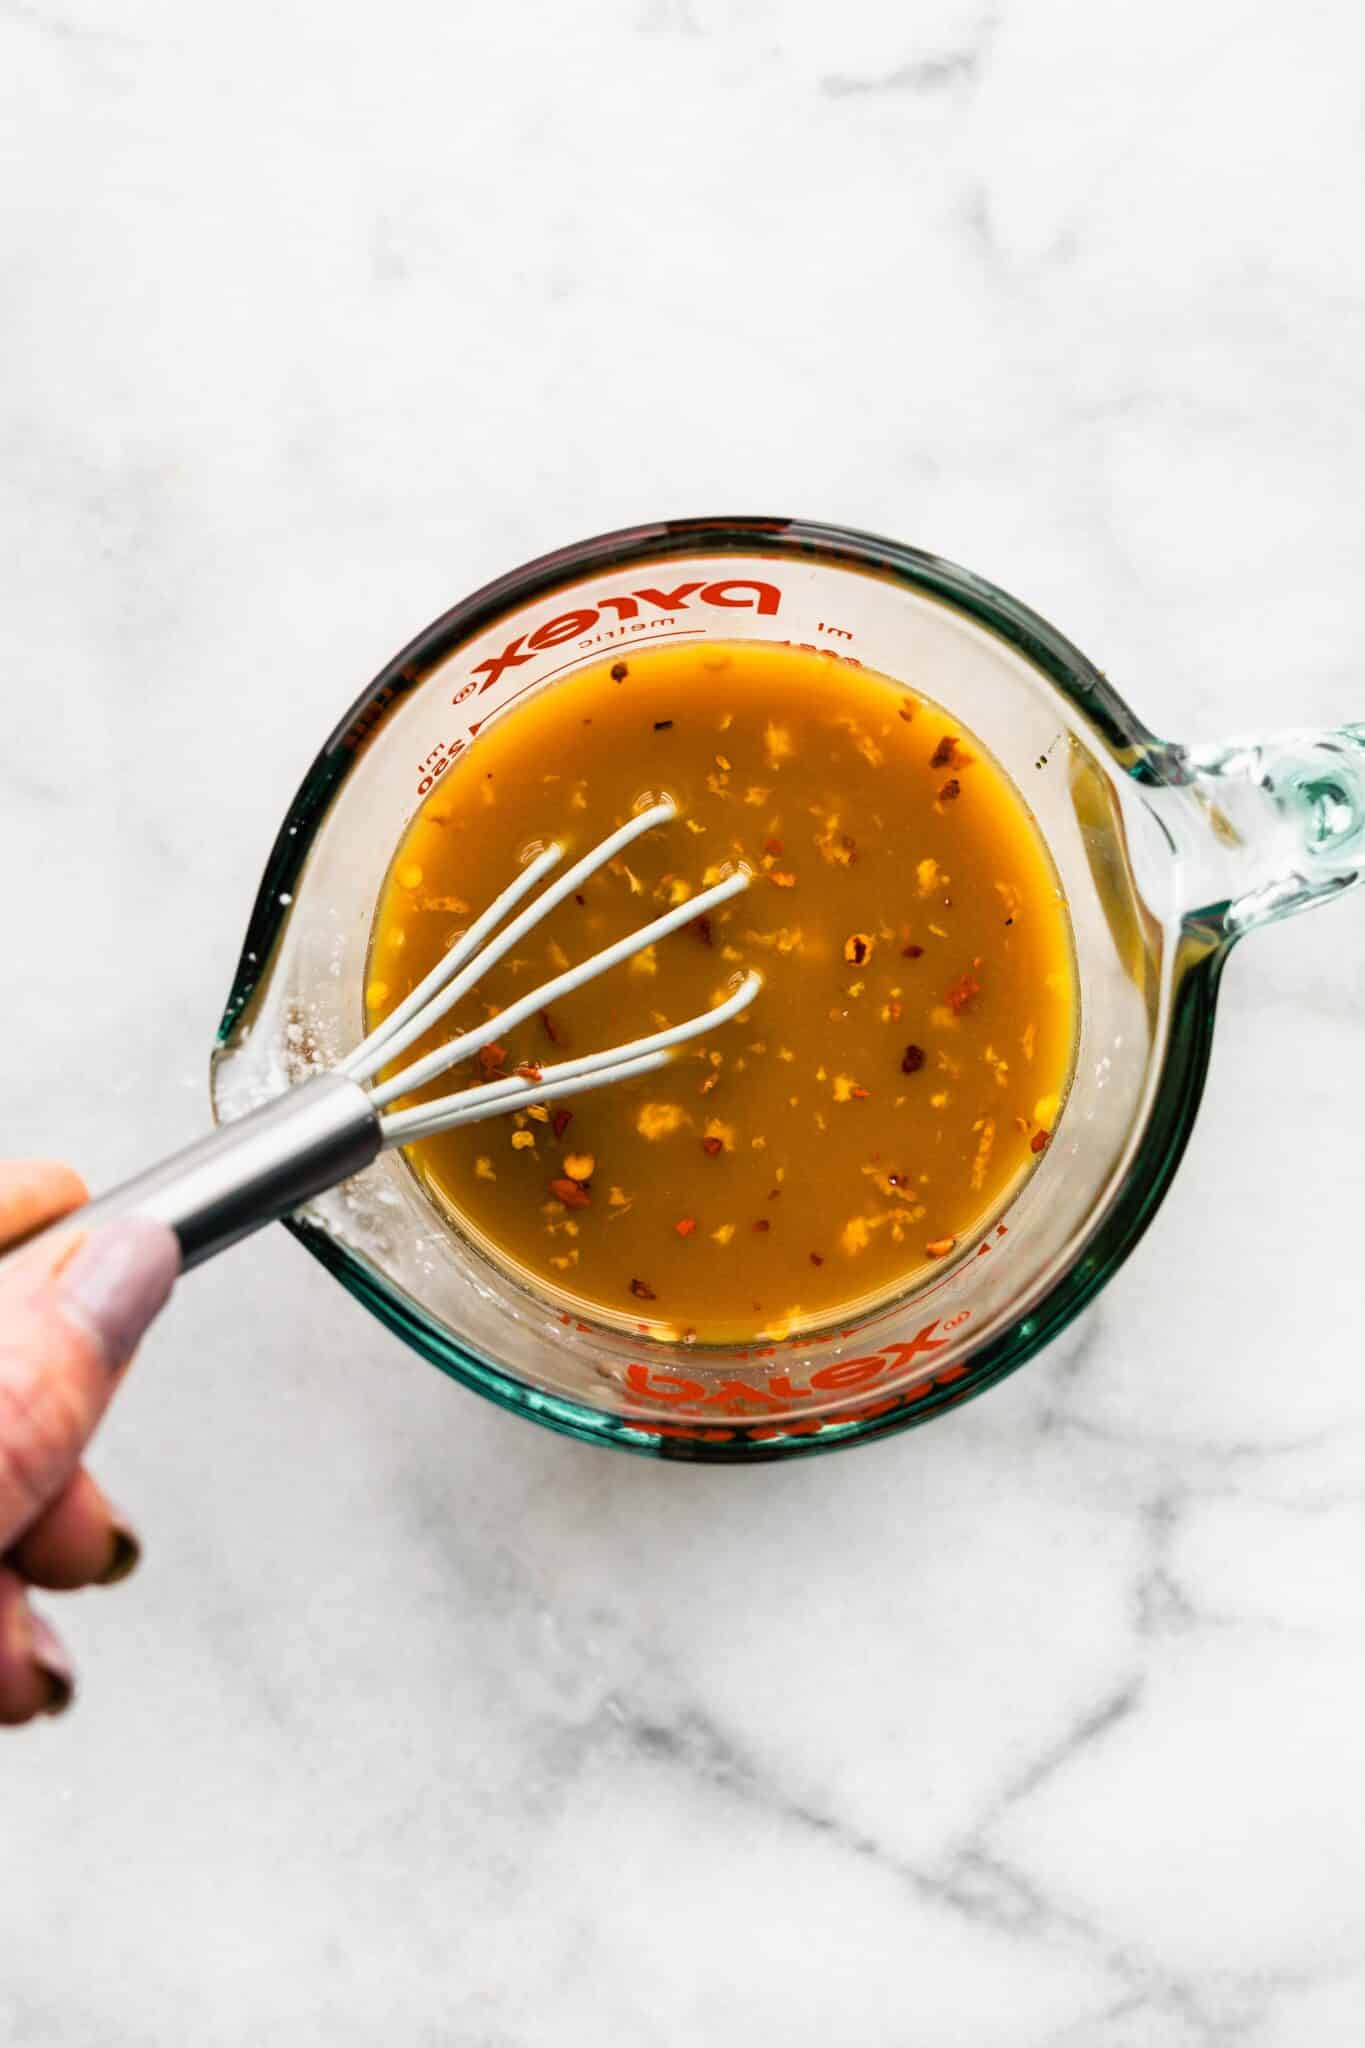 A whisk in a woman's hand whisking orange sauce in a glass measuring cup.